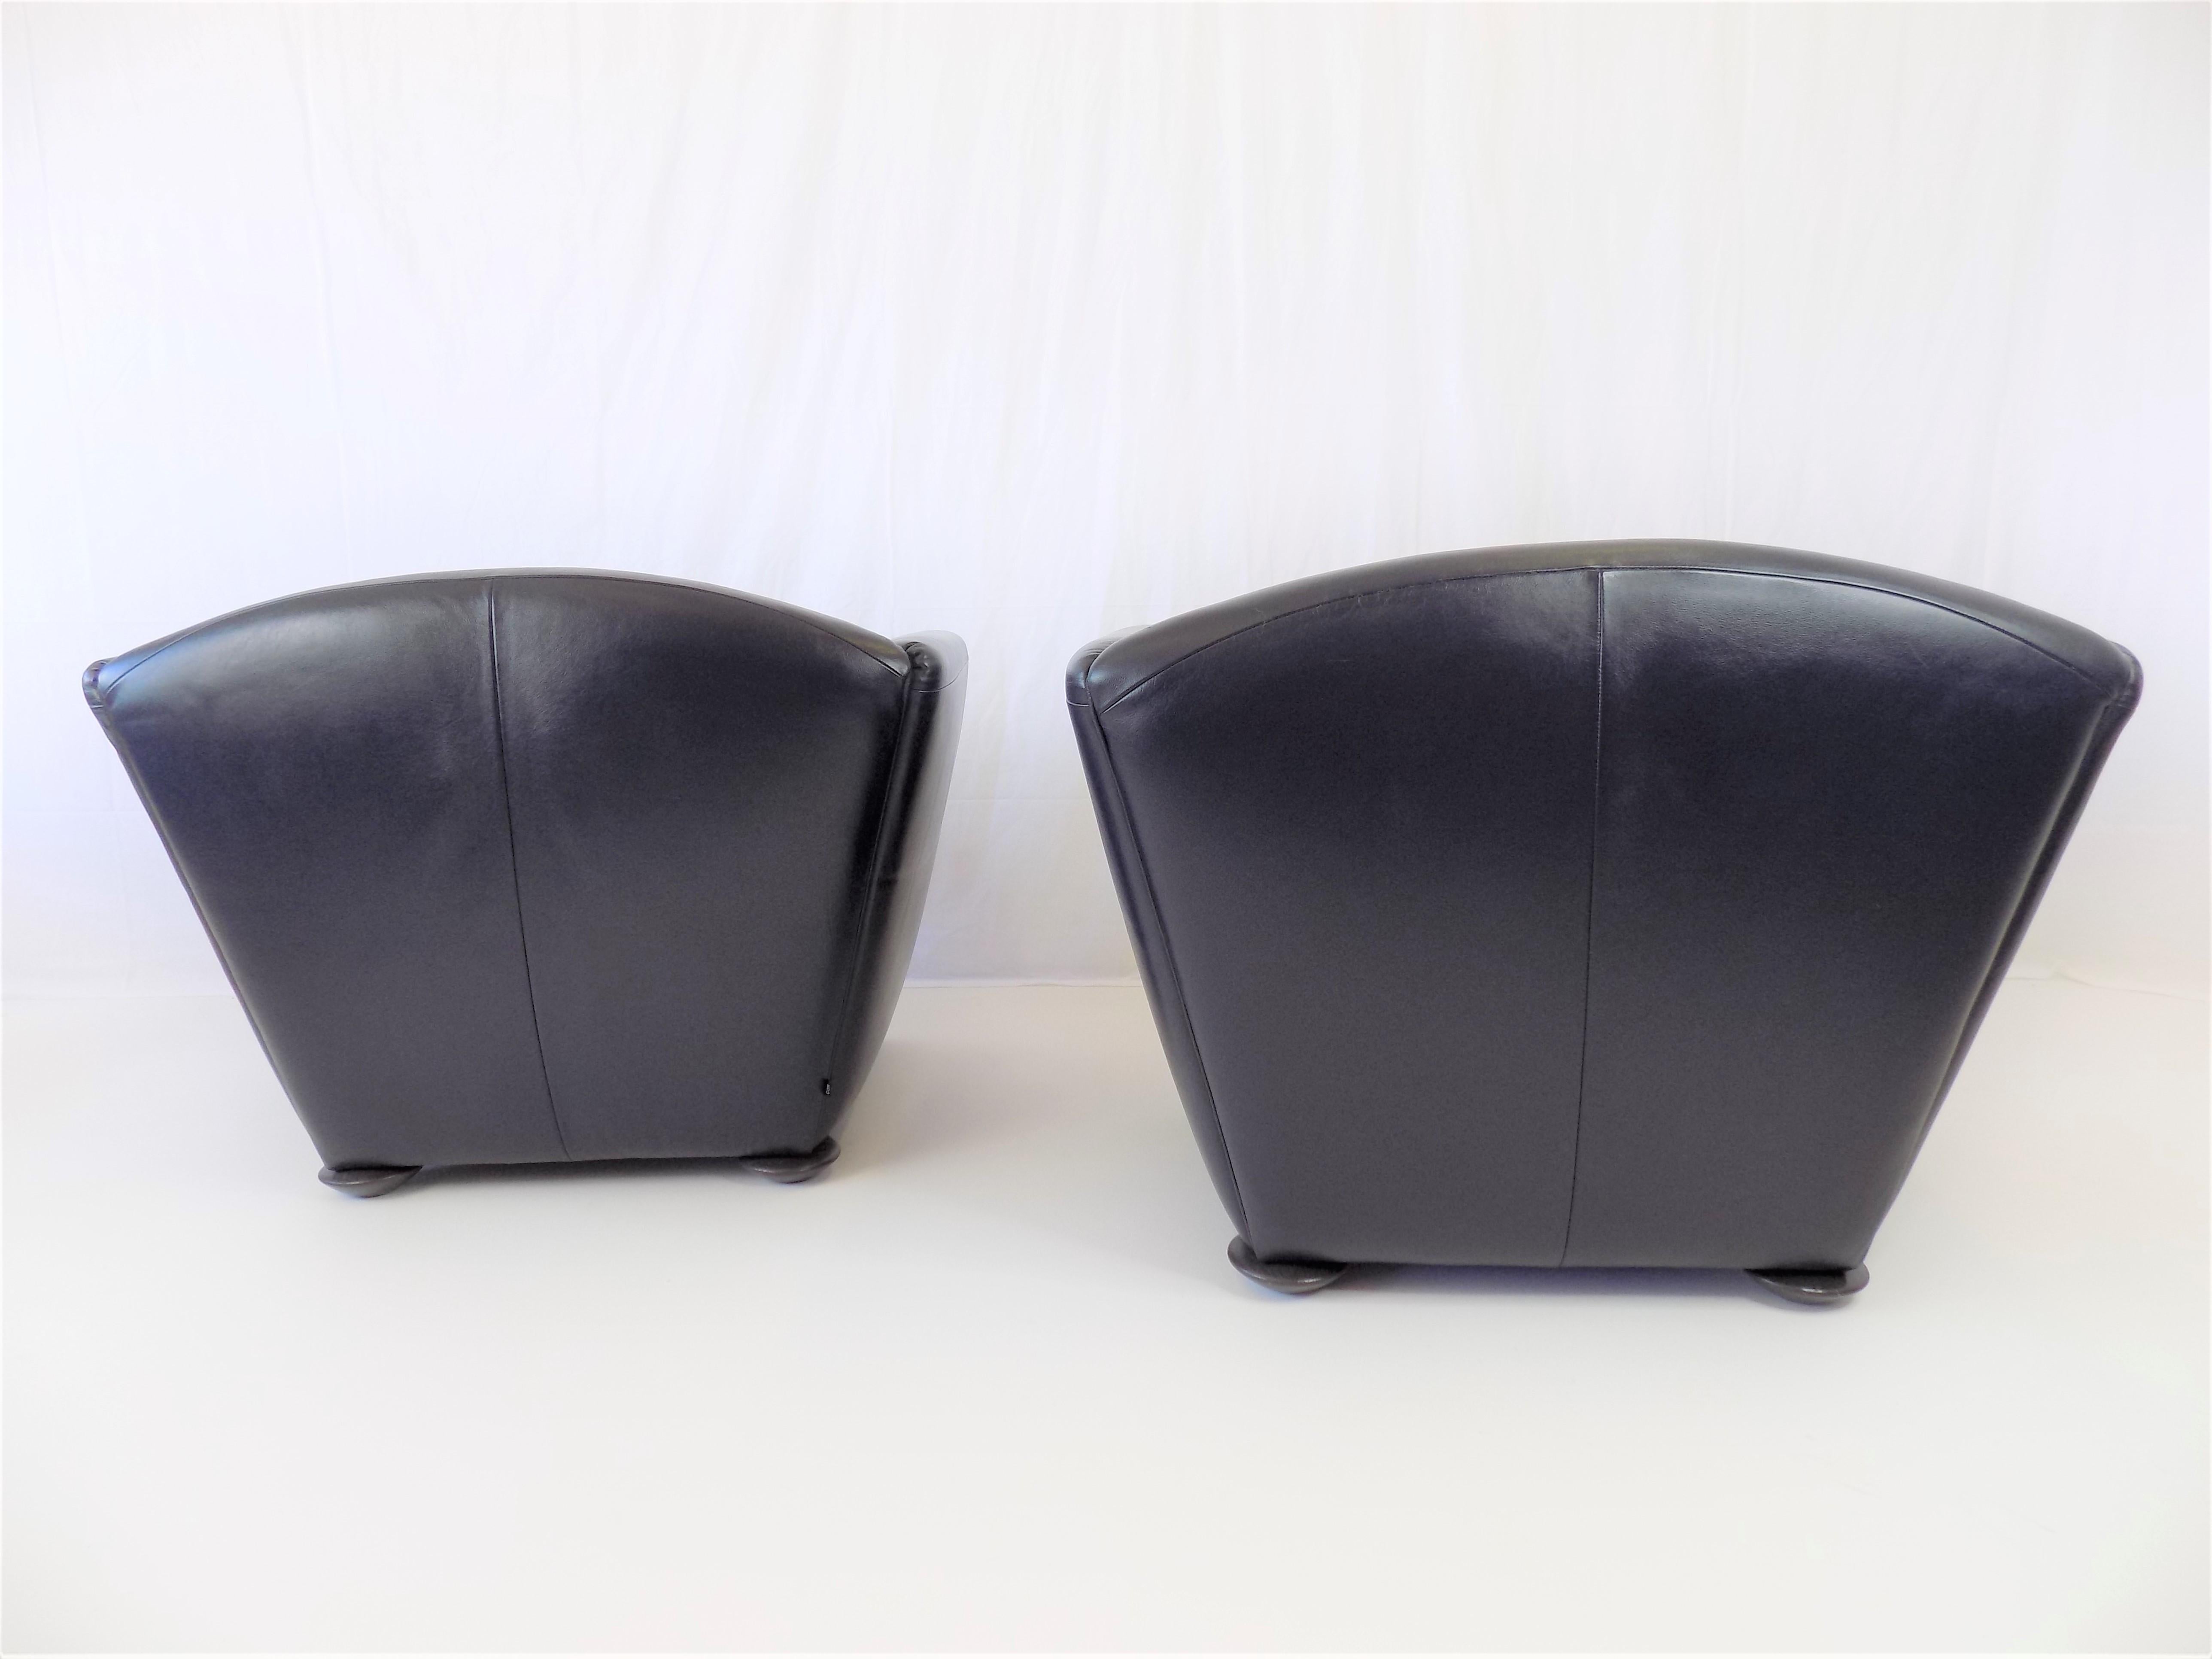 Cor Zelda Set of 2 Leather Armchairs By Peter Maly, Germany, 1980 For Sale 3